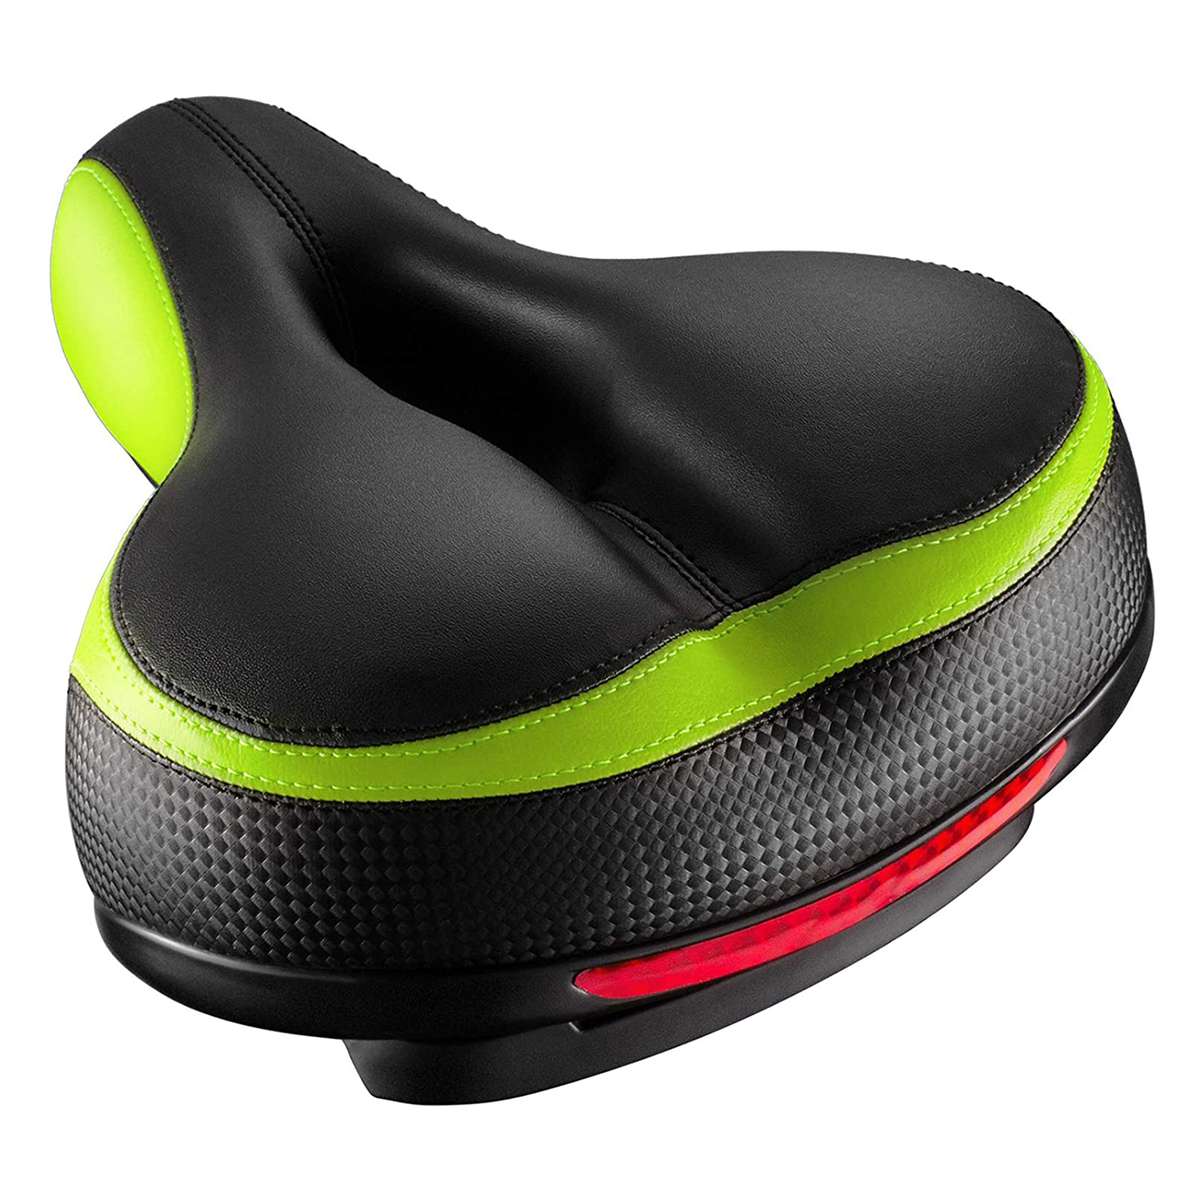 Extra Wide and Padded Bicycle Saddle Front Seat Large Comfort Breathable Bicycle Saddle Suitable for Women and Men Most Comfortable Bike Seat